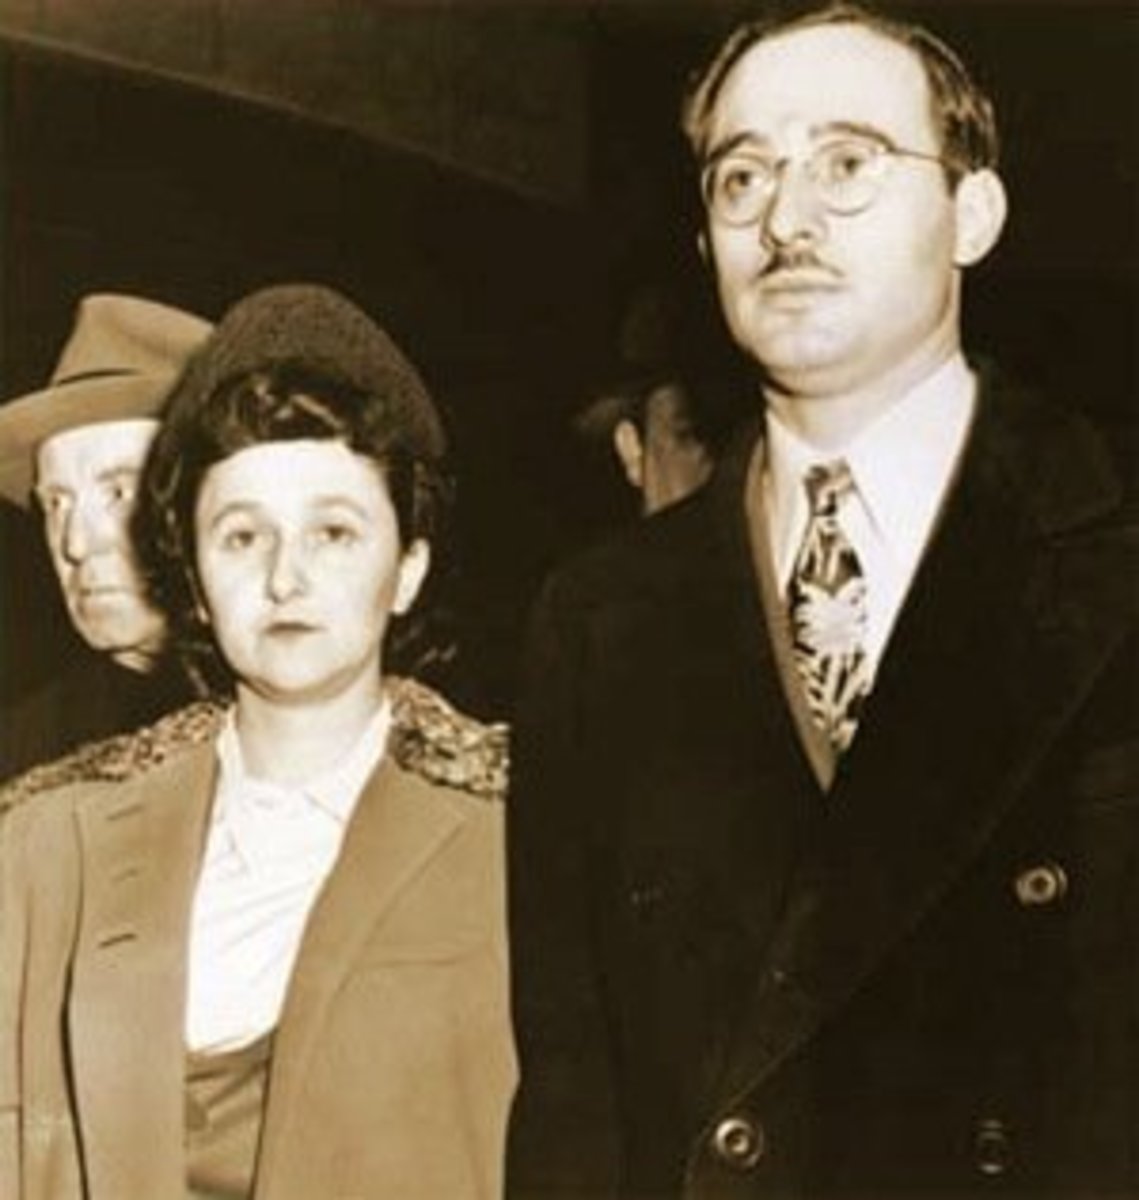 Ethel and Julius Rosenberg: Exemplary courage grounded in moral principles.